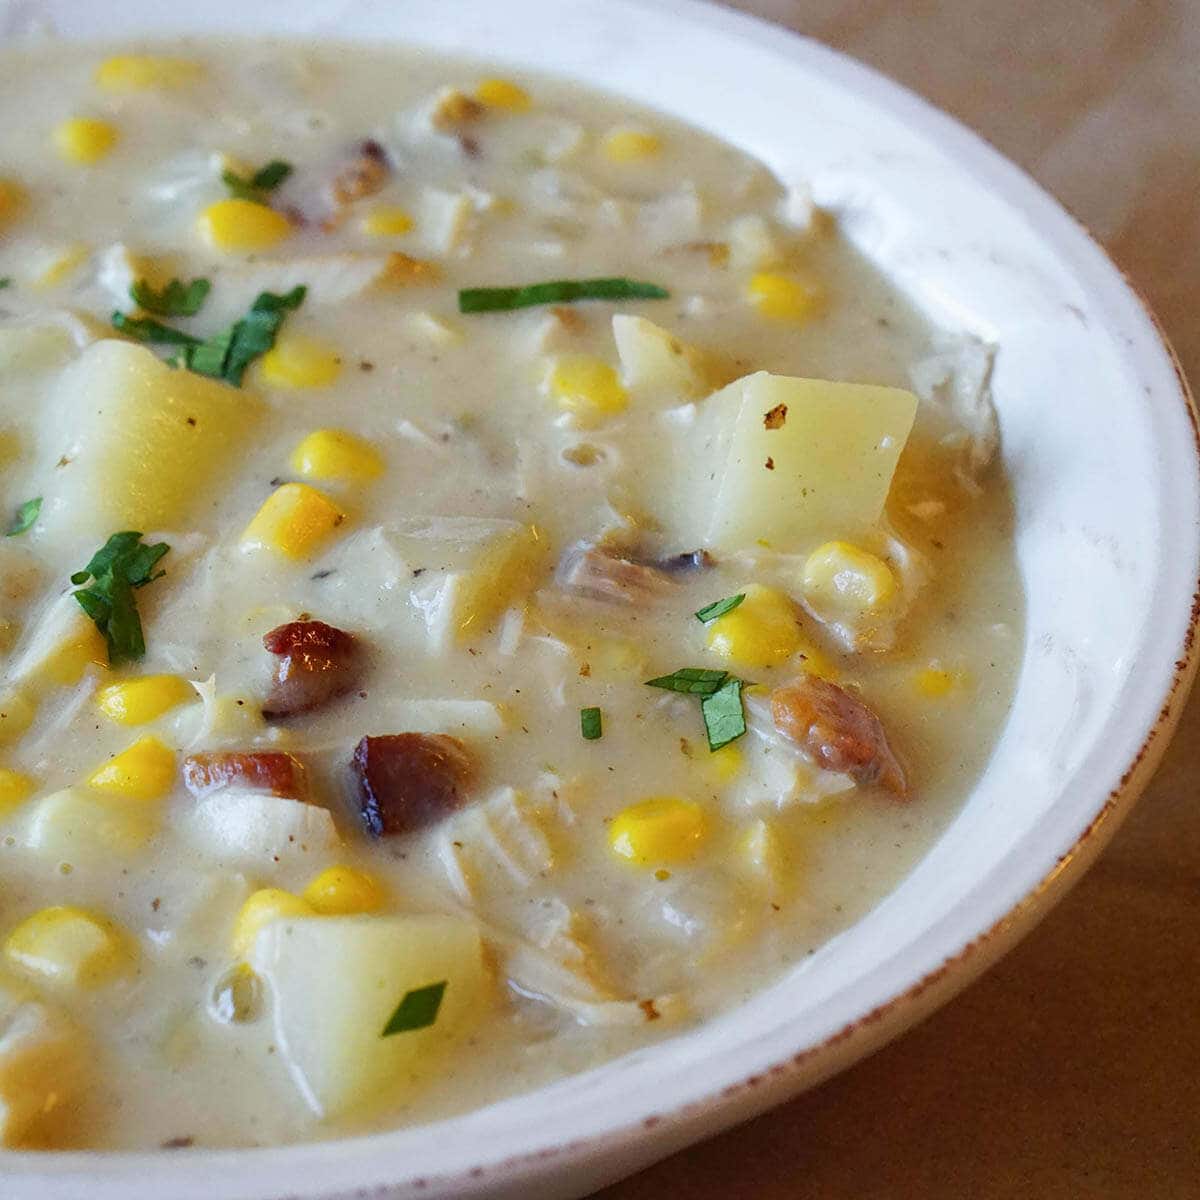 A bowl of turkey corn chowder garnished with chives.